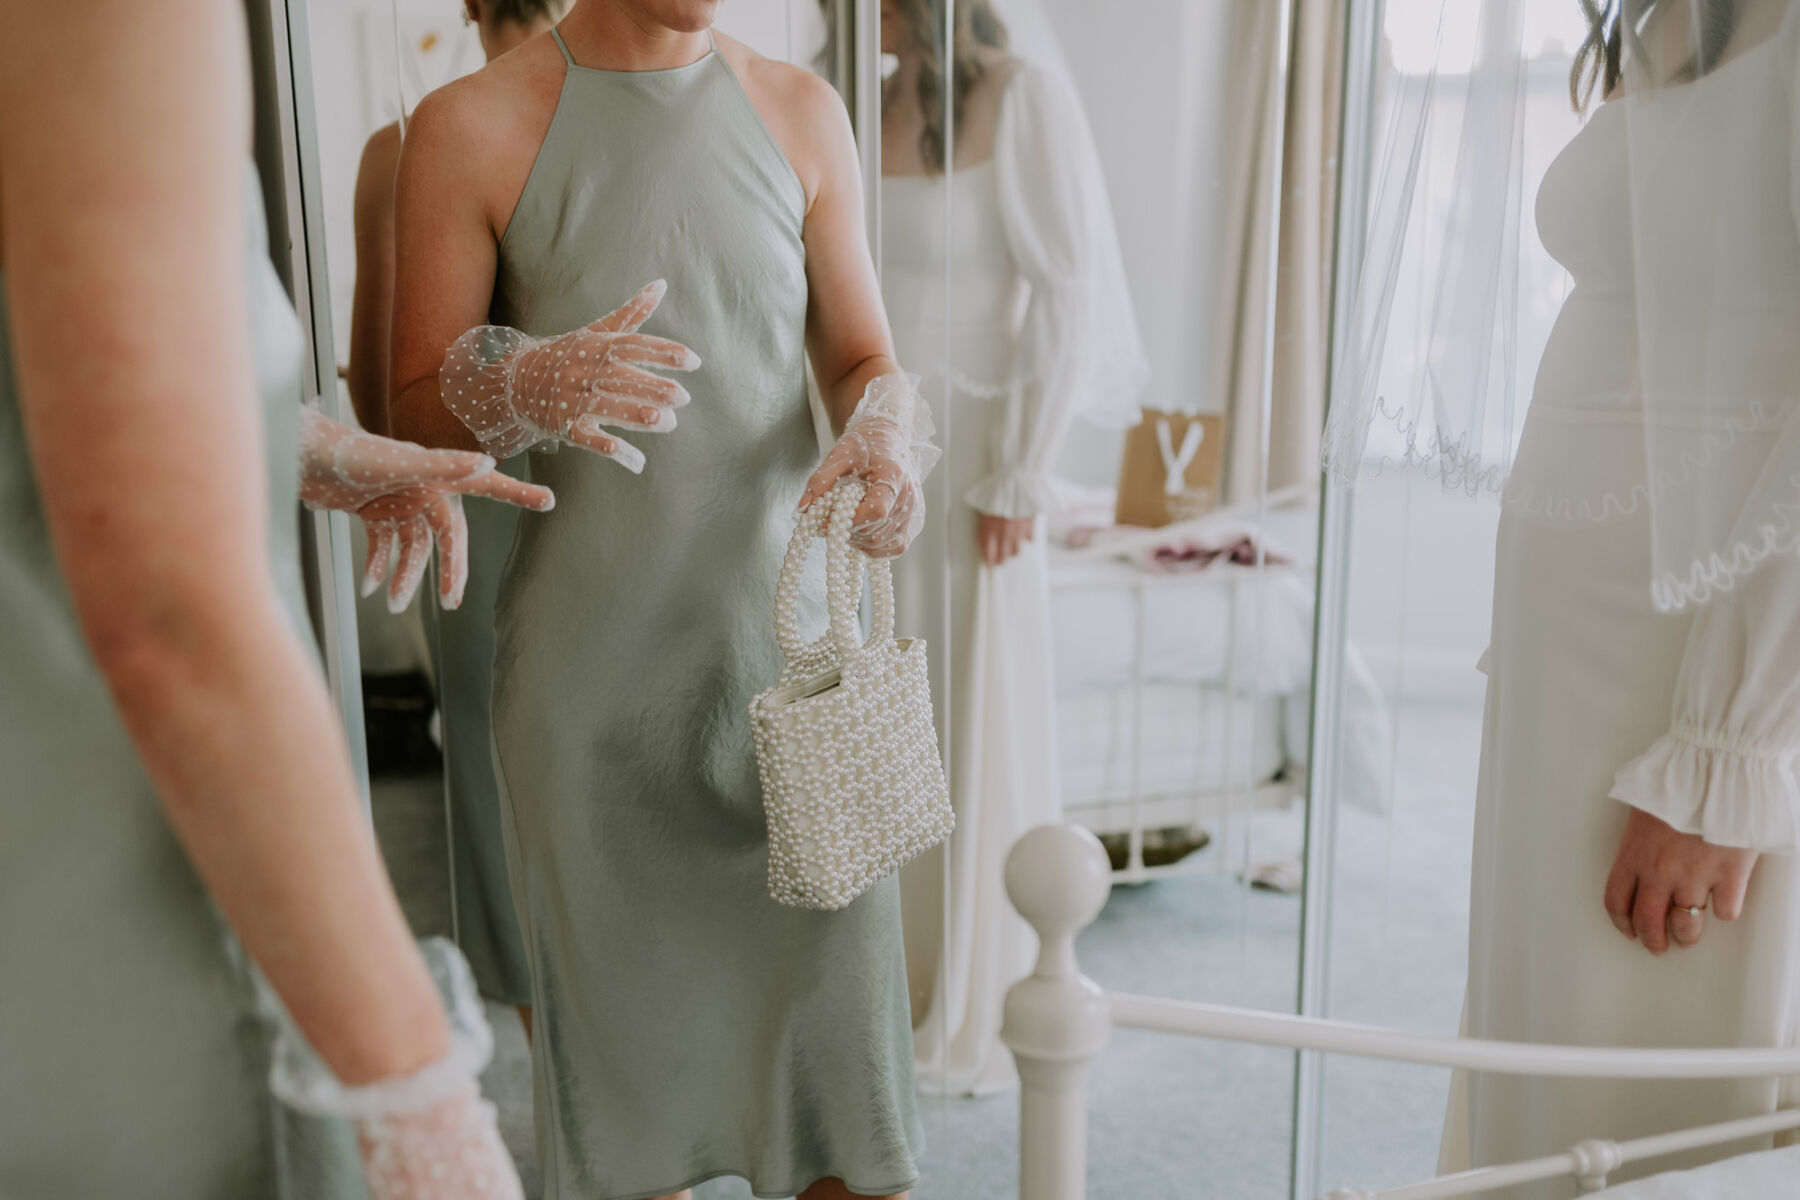 Bridesmaid in green slip dress holding a pearl clutch bag. Polka Dot tulle white gloves.